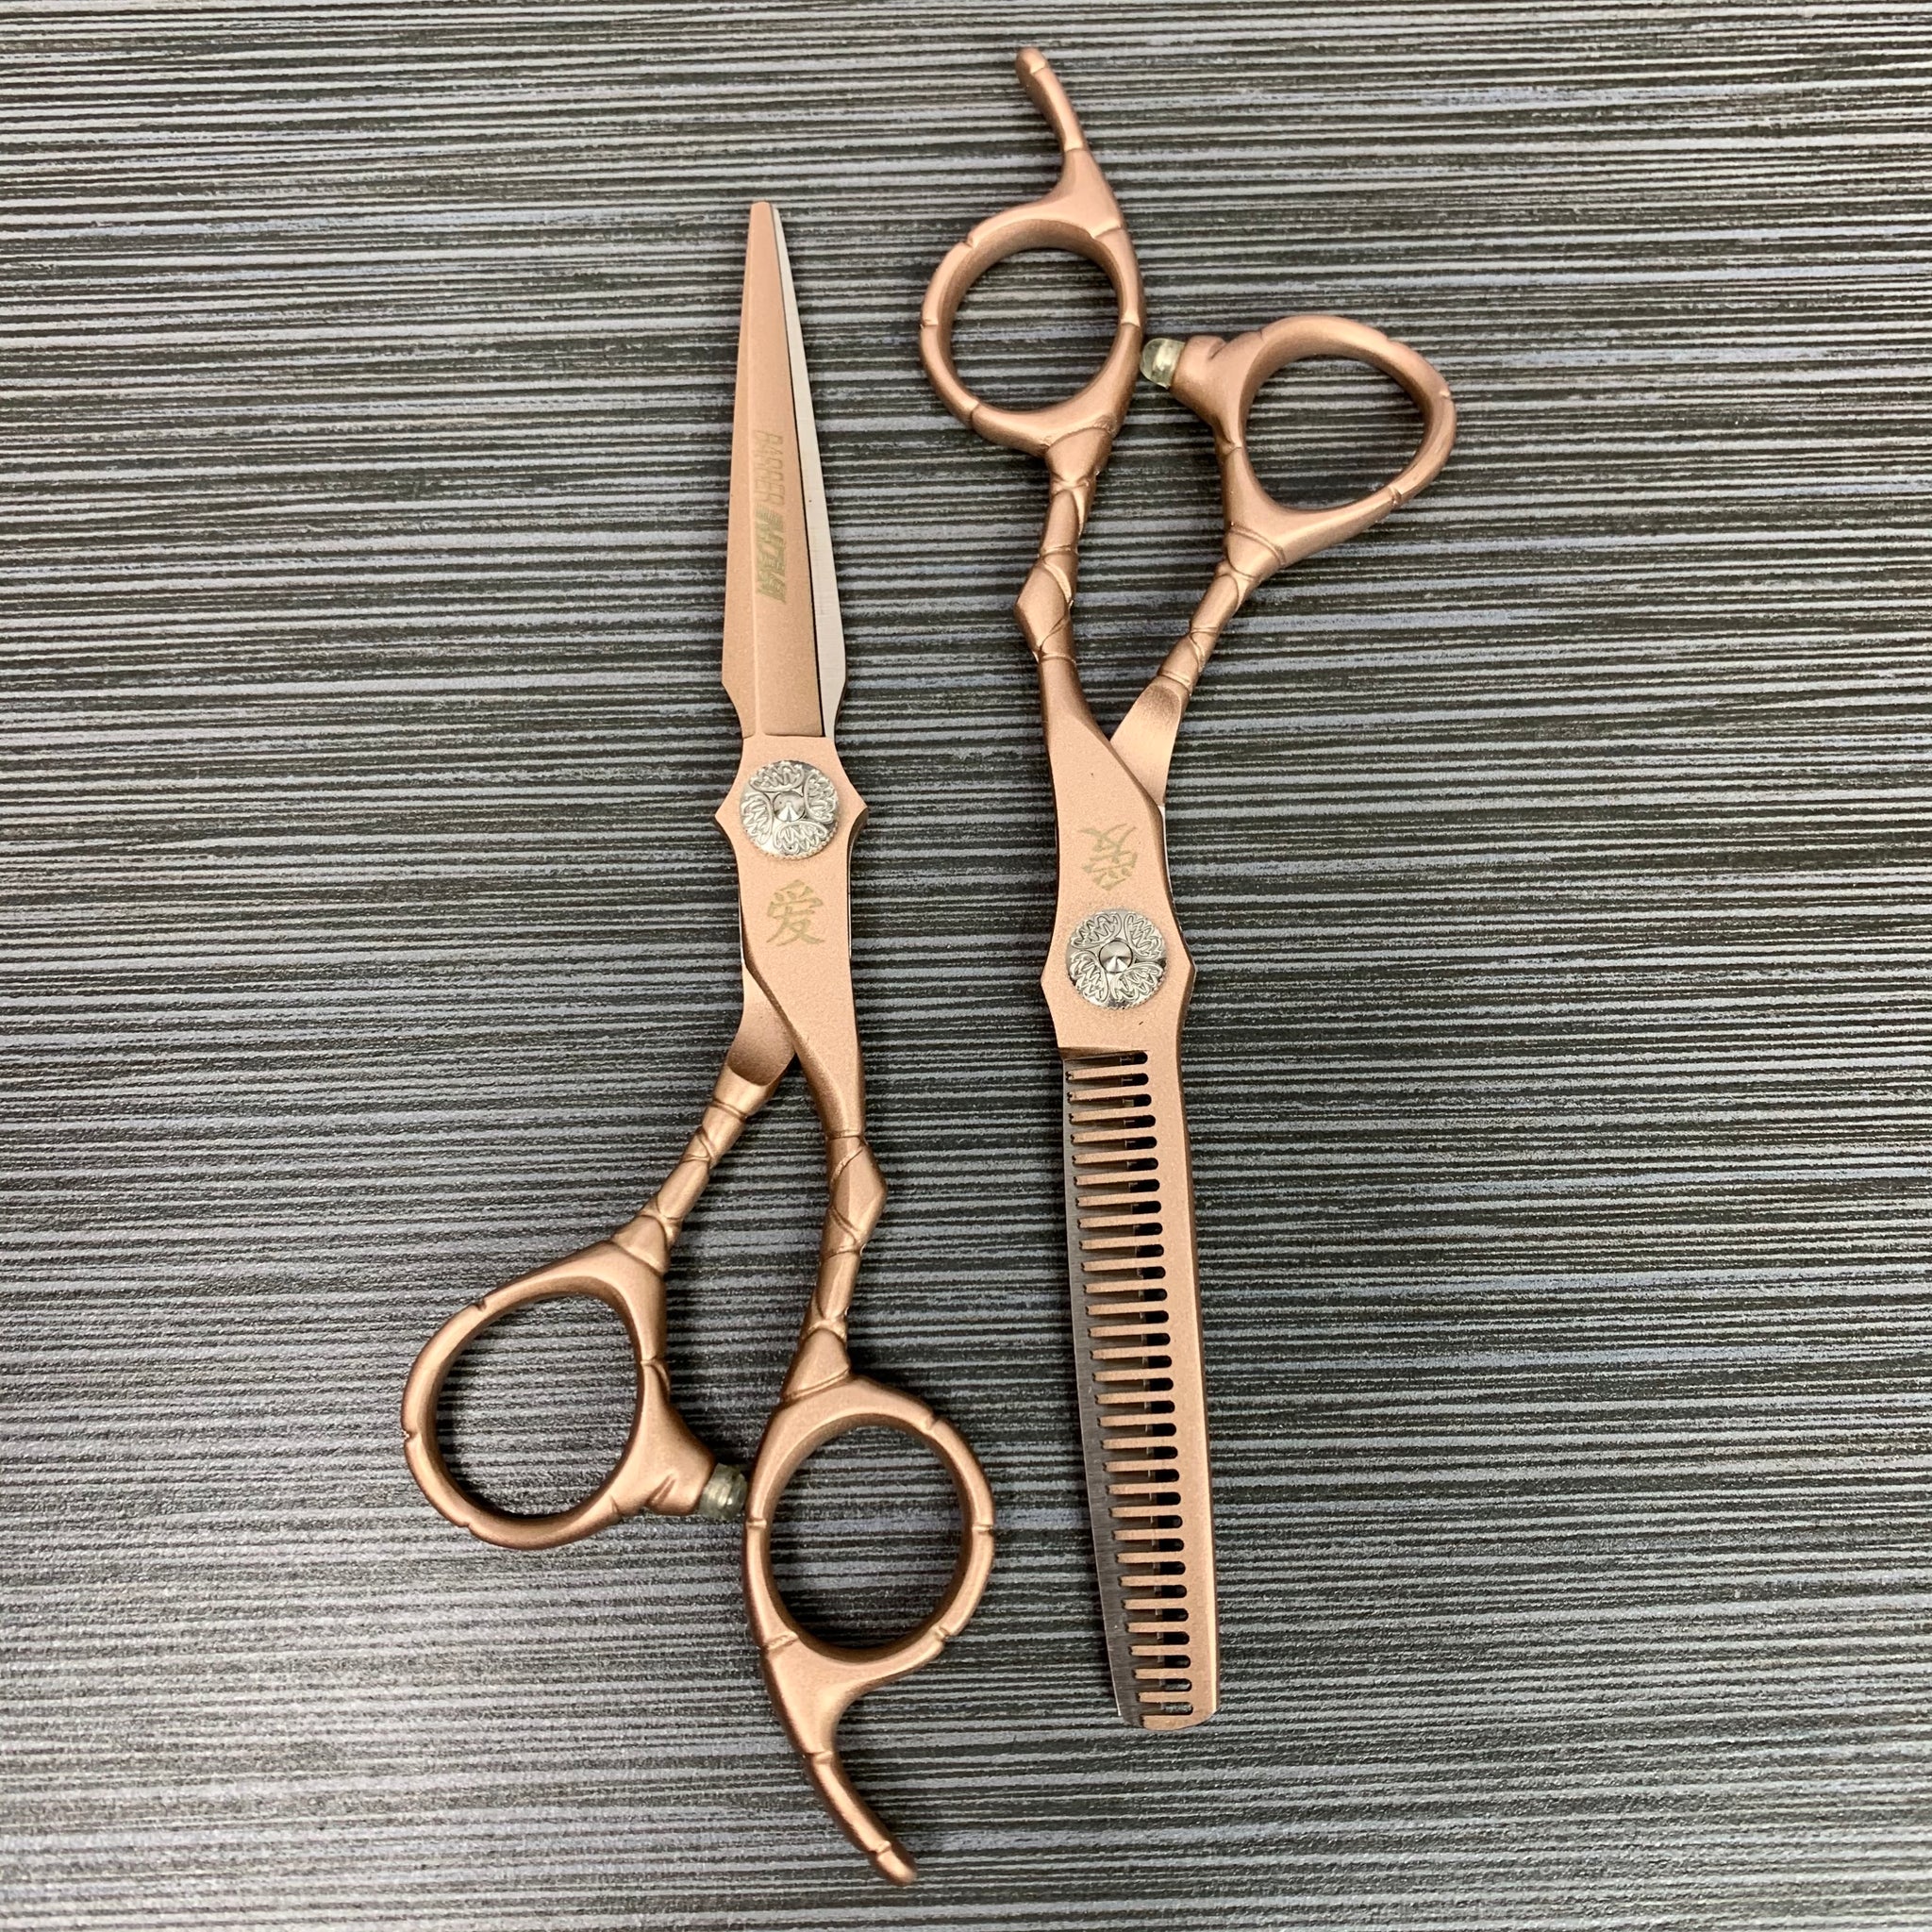 divine being, rose gold, styling shear, thinning shear, lightweight, adjustable tension, scissors